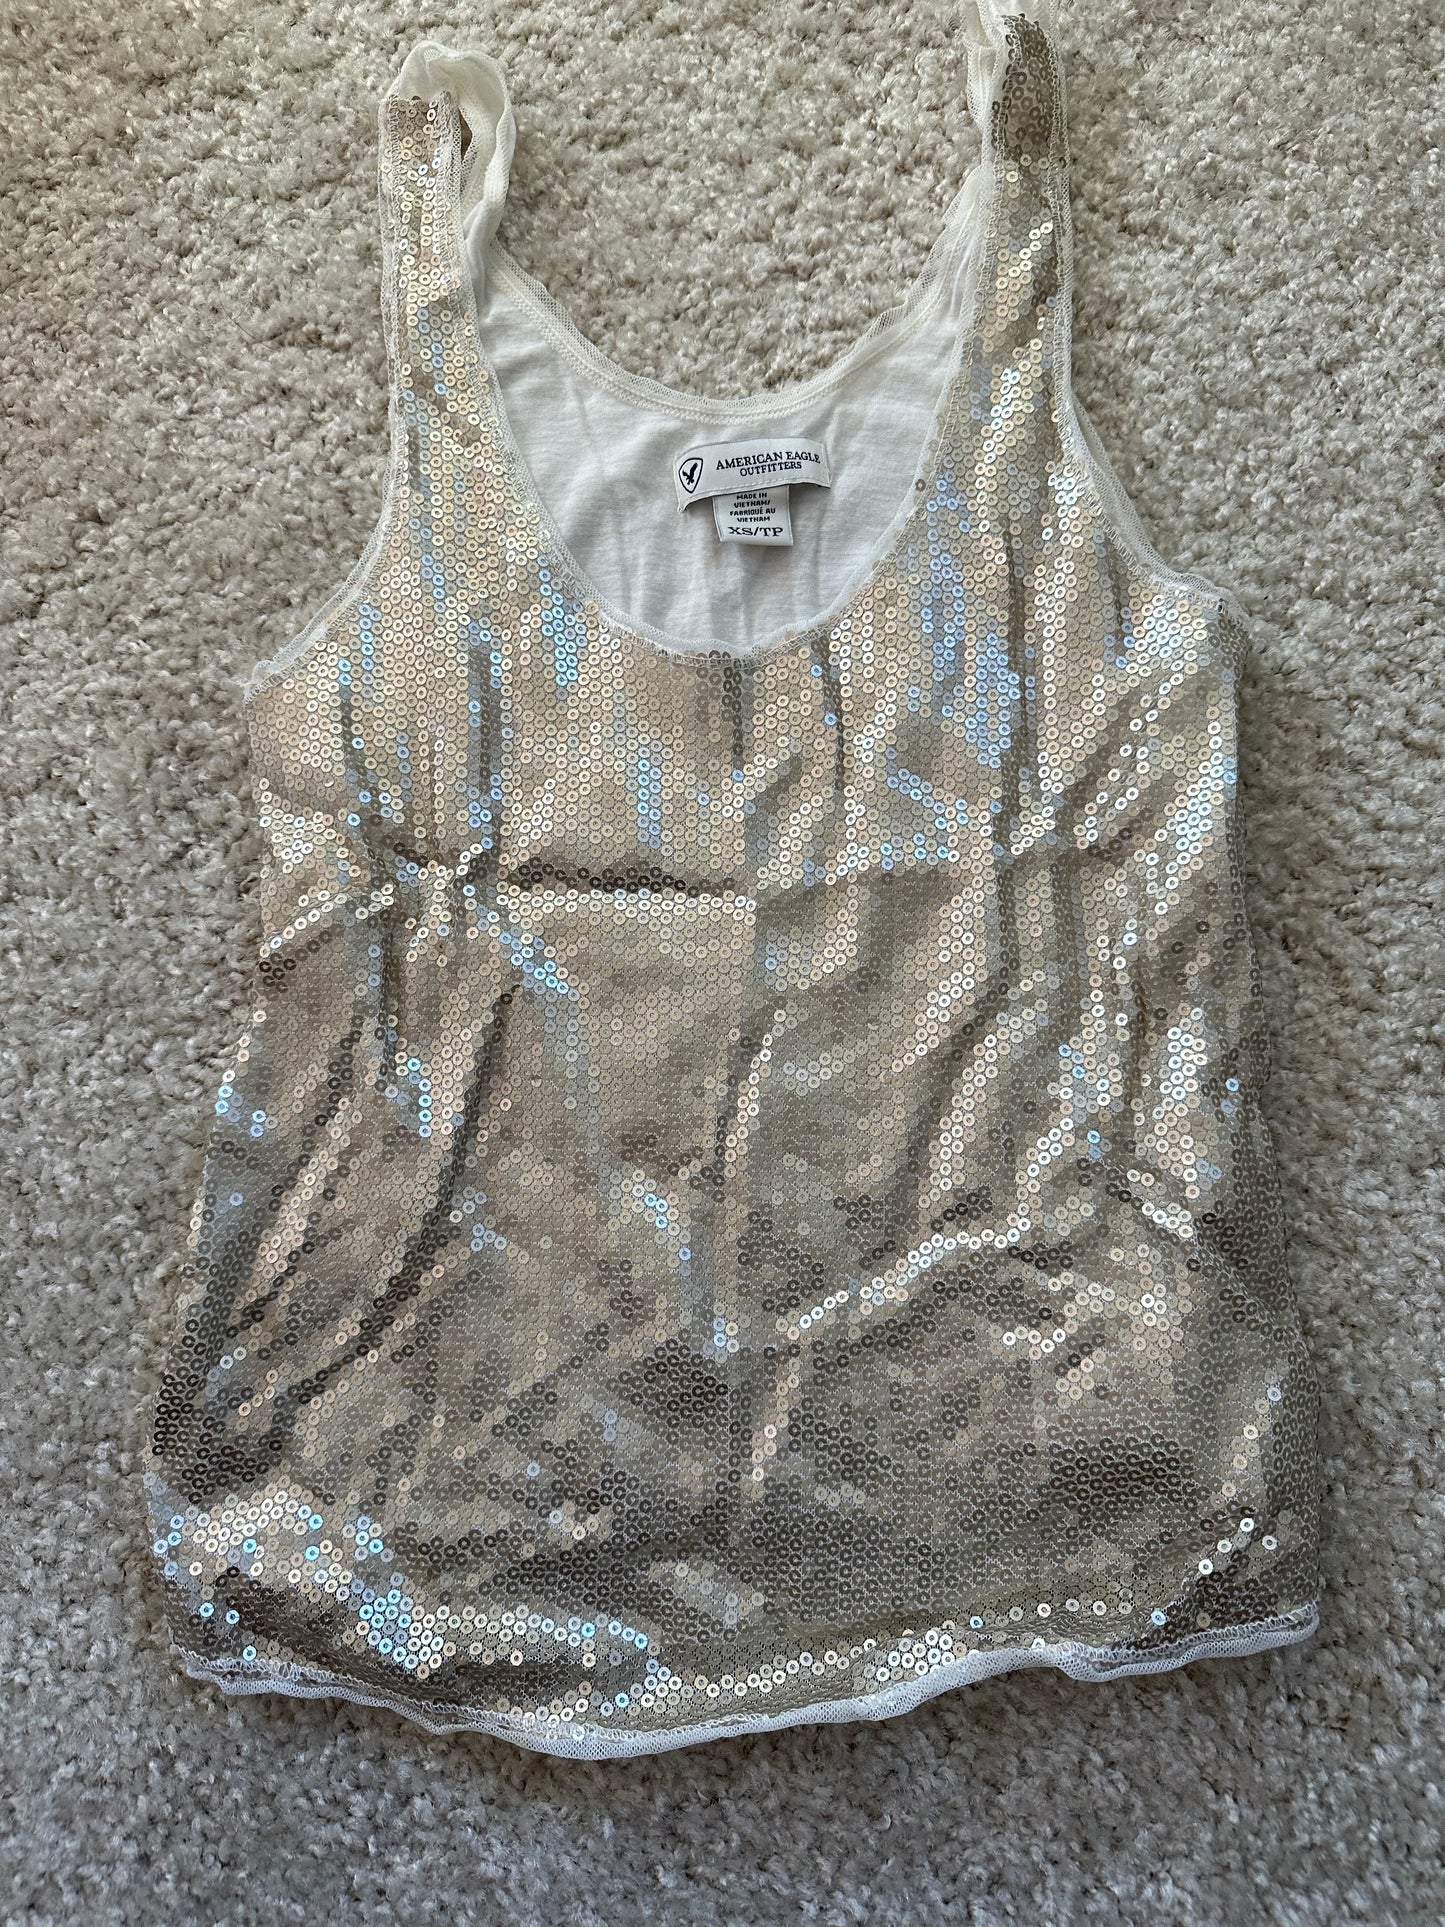 XS American Eagle Sequin Tank Top